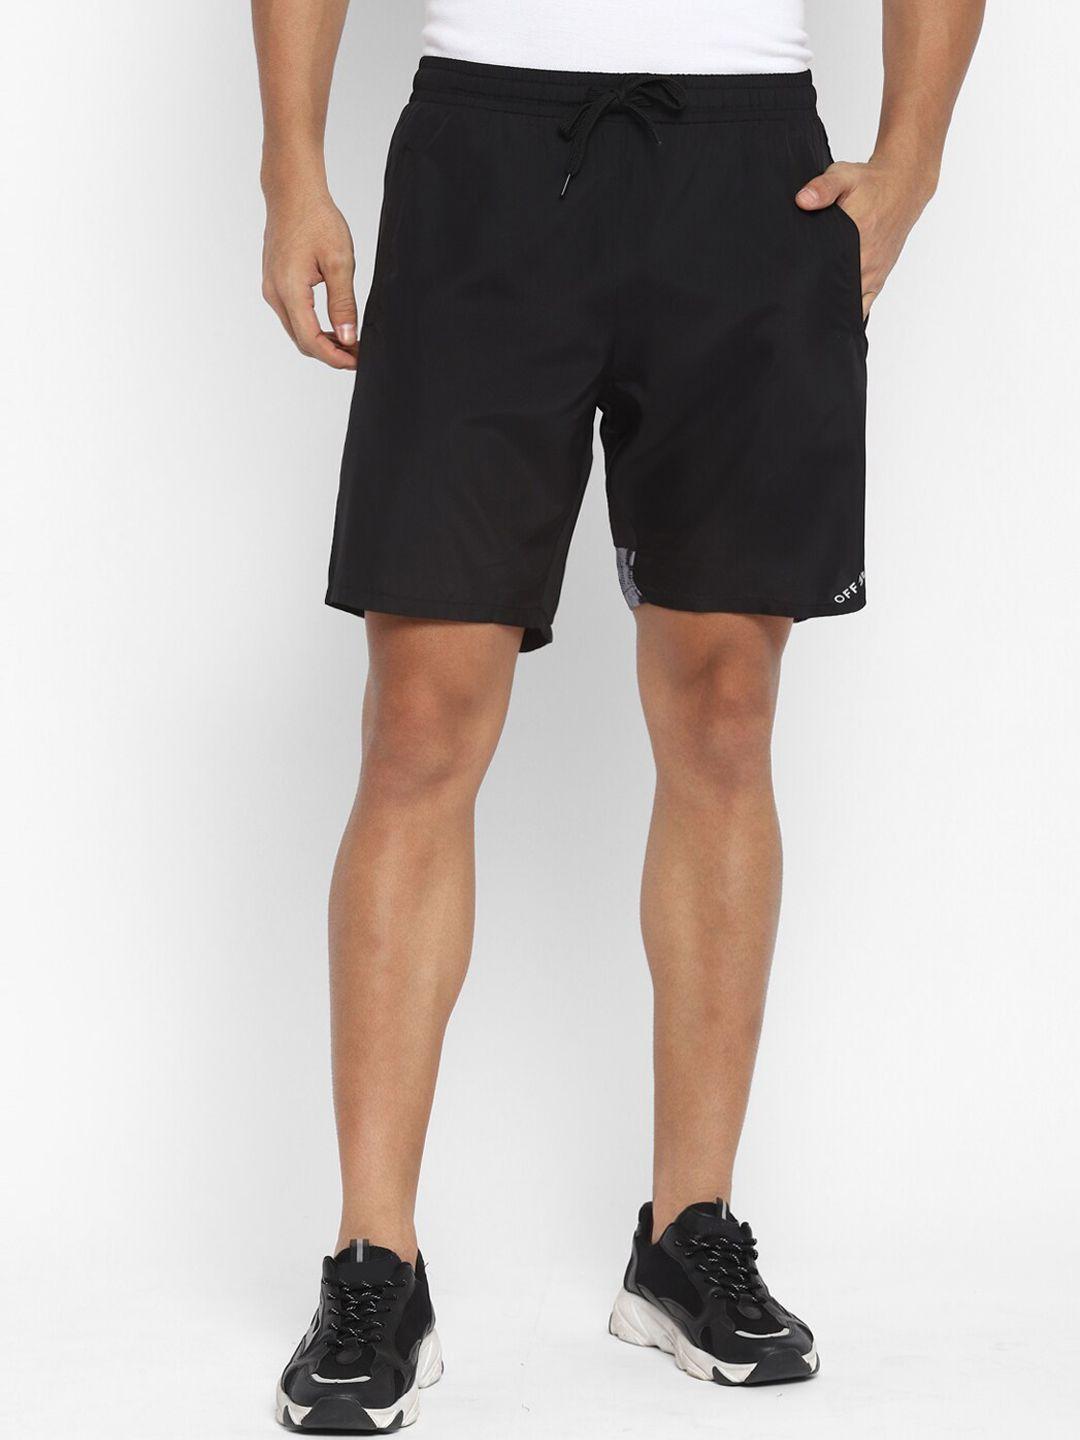 off-limits-men-black-solid-training-or-gym-sports-shorts